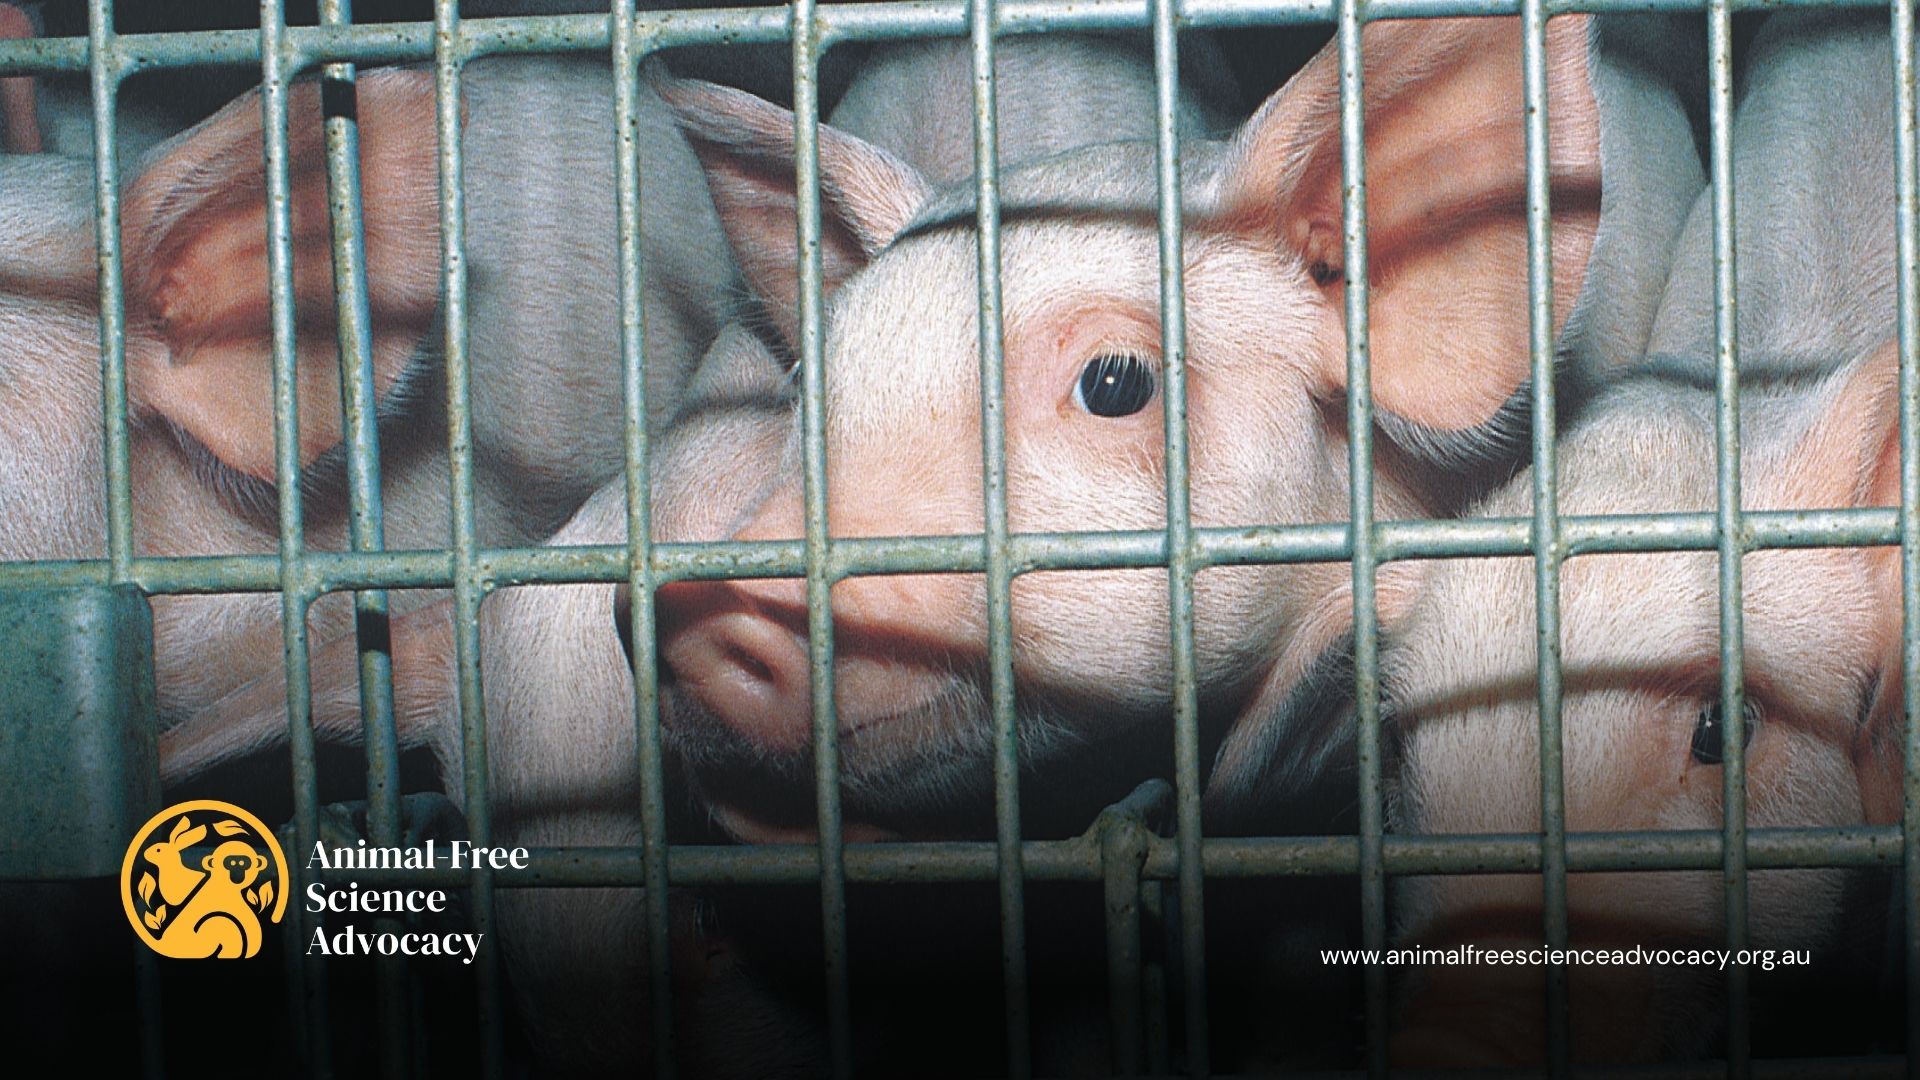 Tiny pigs stare out with haunting expressions from within cages in a research facility